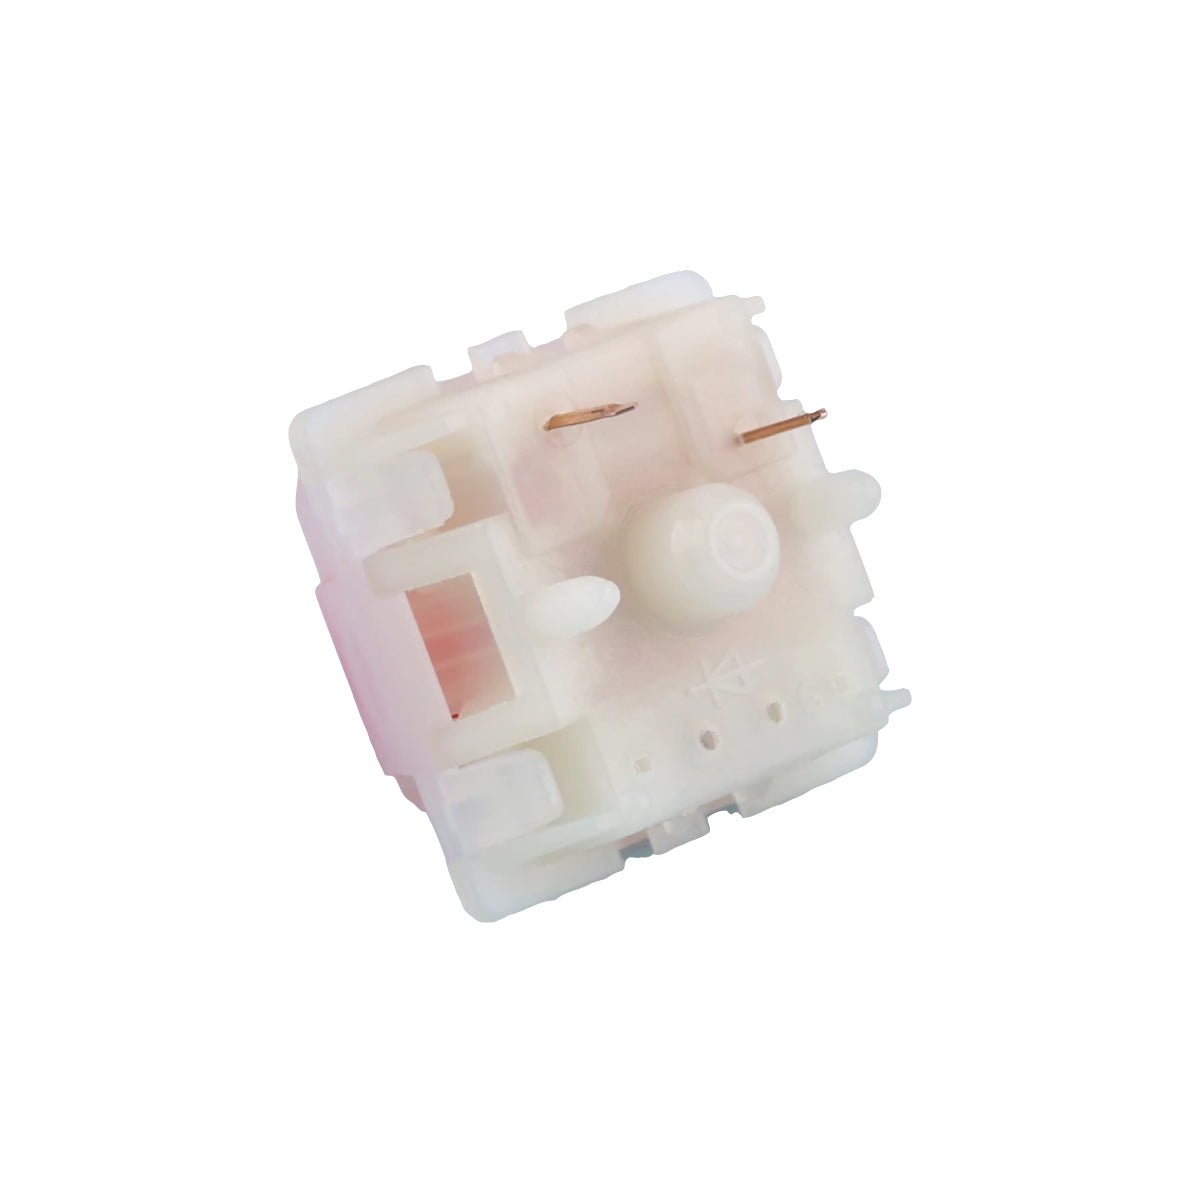 KBD Fans Gateron Milky Housing Switches - Green - Store 974 | ستور ٩٧٤